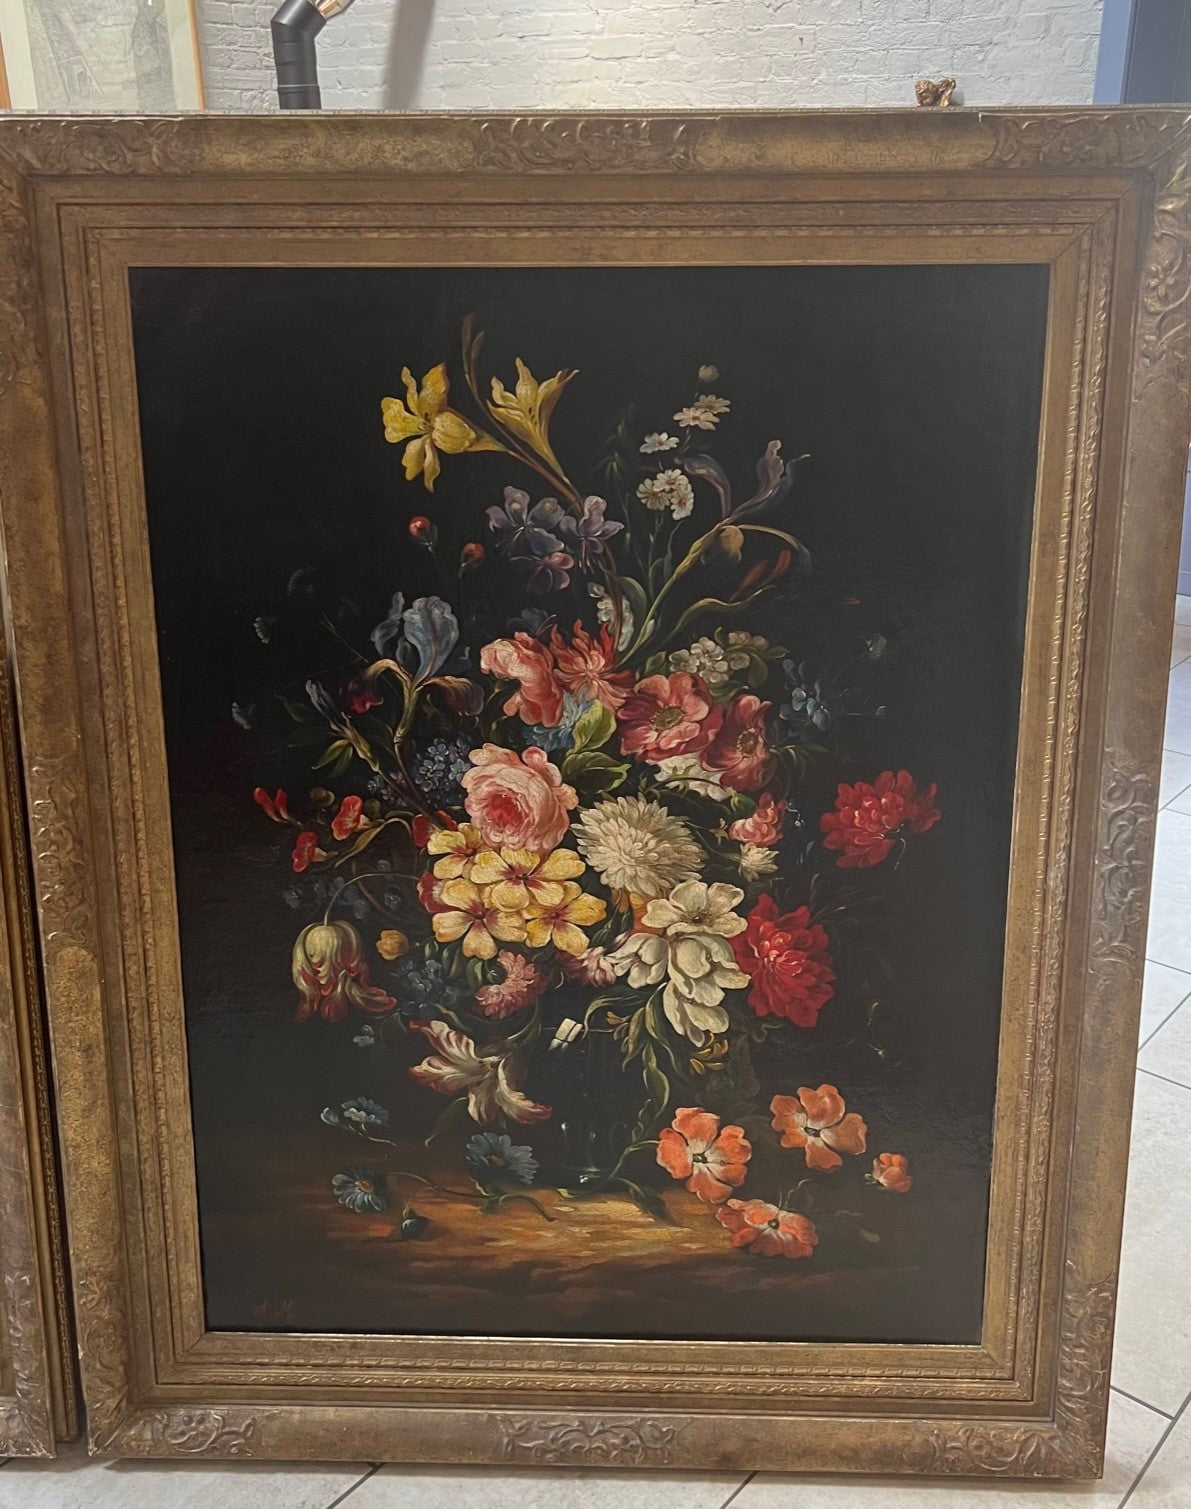 PAIR OF LATE18TH/EARLY 19TH CENTURY OIL ON CANVAS LARGE DUTCH STILL LIVES